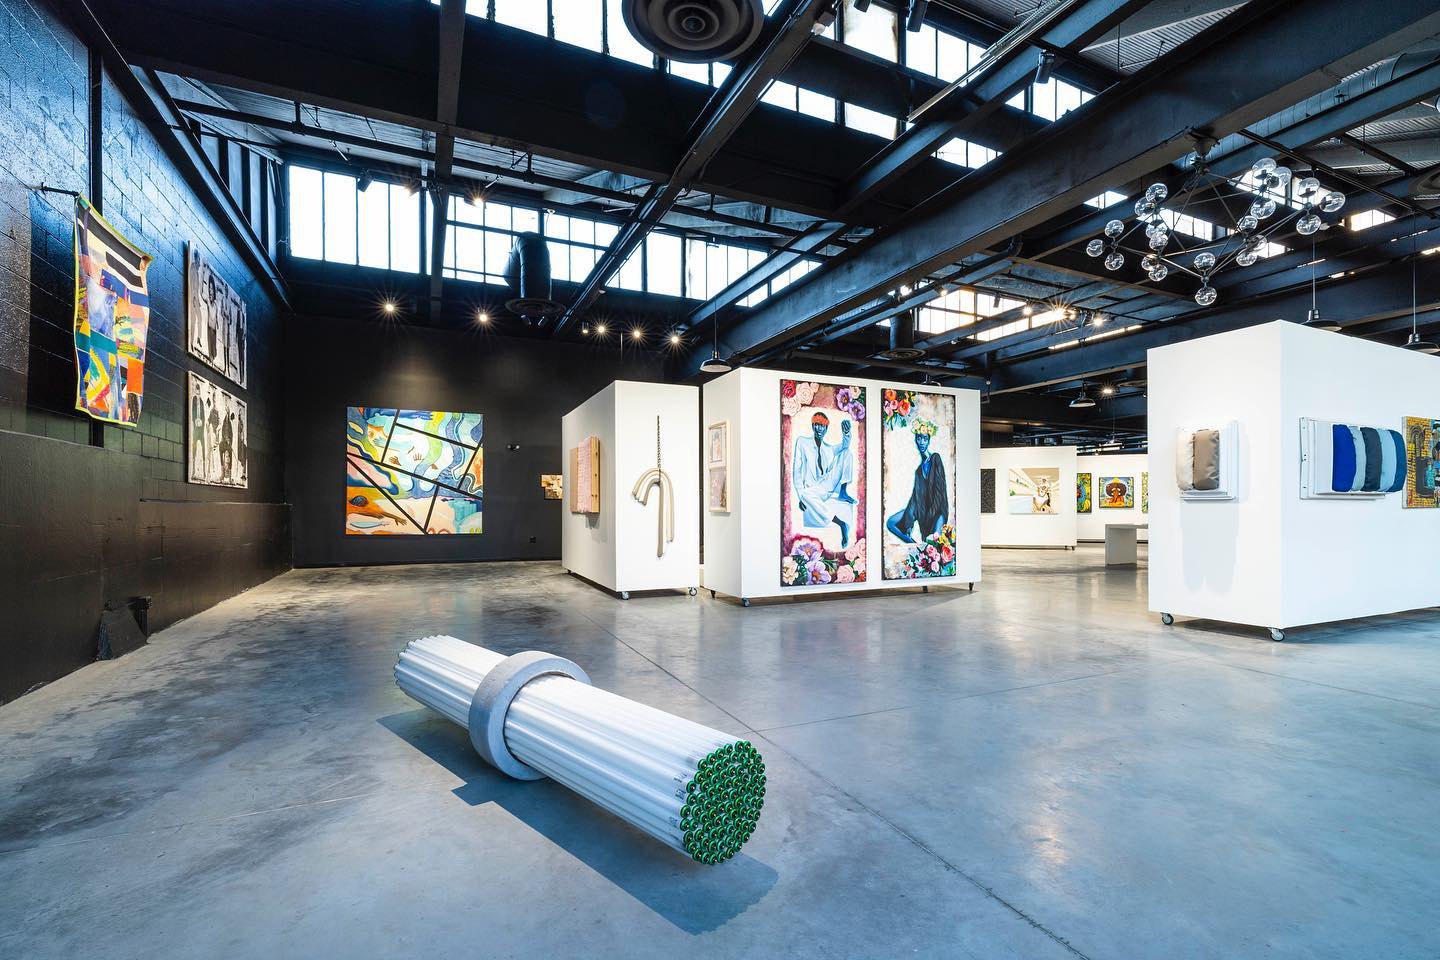 A wide shot of a gallery floor showcasing a mix of two-dimensional and three-dimensional artworks. Some of them are hanging on moveable white walls and other colorful works are on the black-colored walls of the space. In the foreground, there is a sculptural work made of fluorescent tube lights.